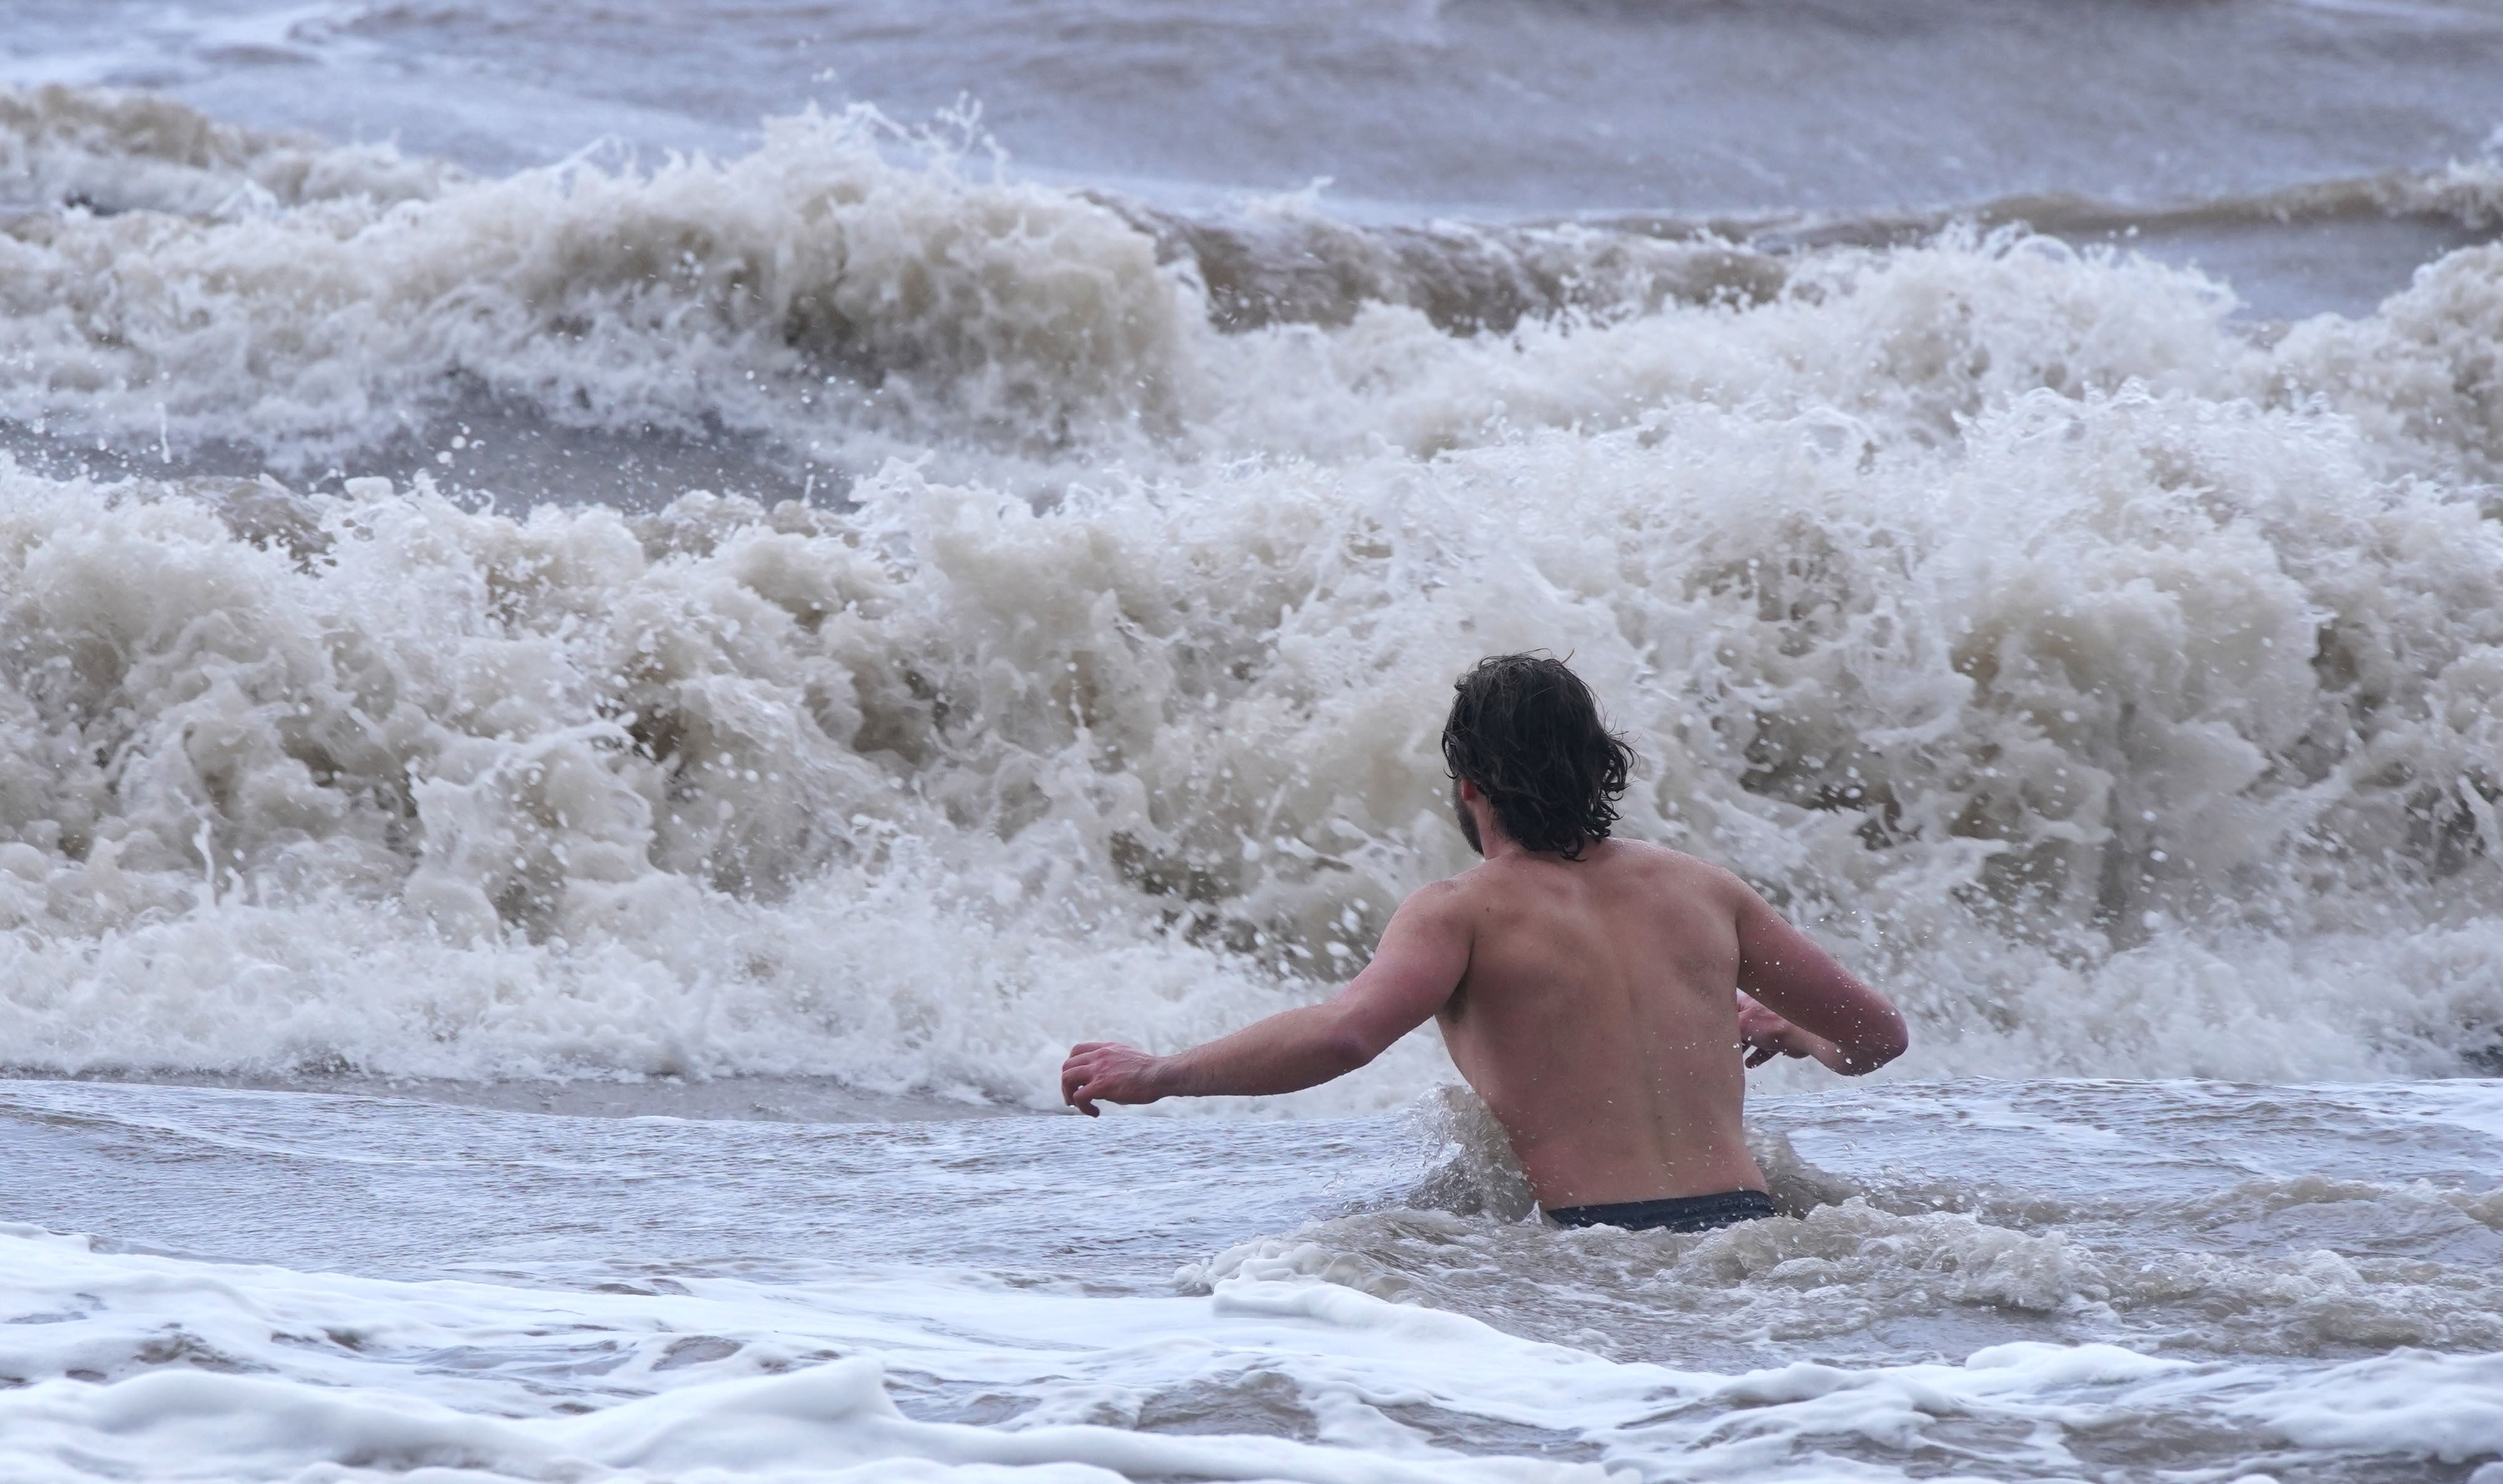 A man swims in the sea in New Brighton, Merseyside, as Storm Eunice hits the UK (Peter Byrne/PA)